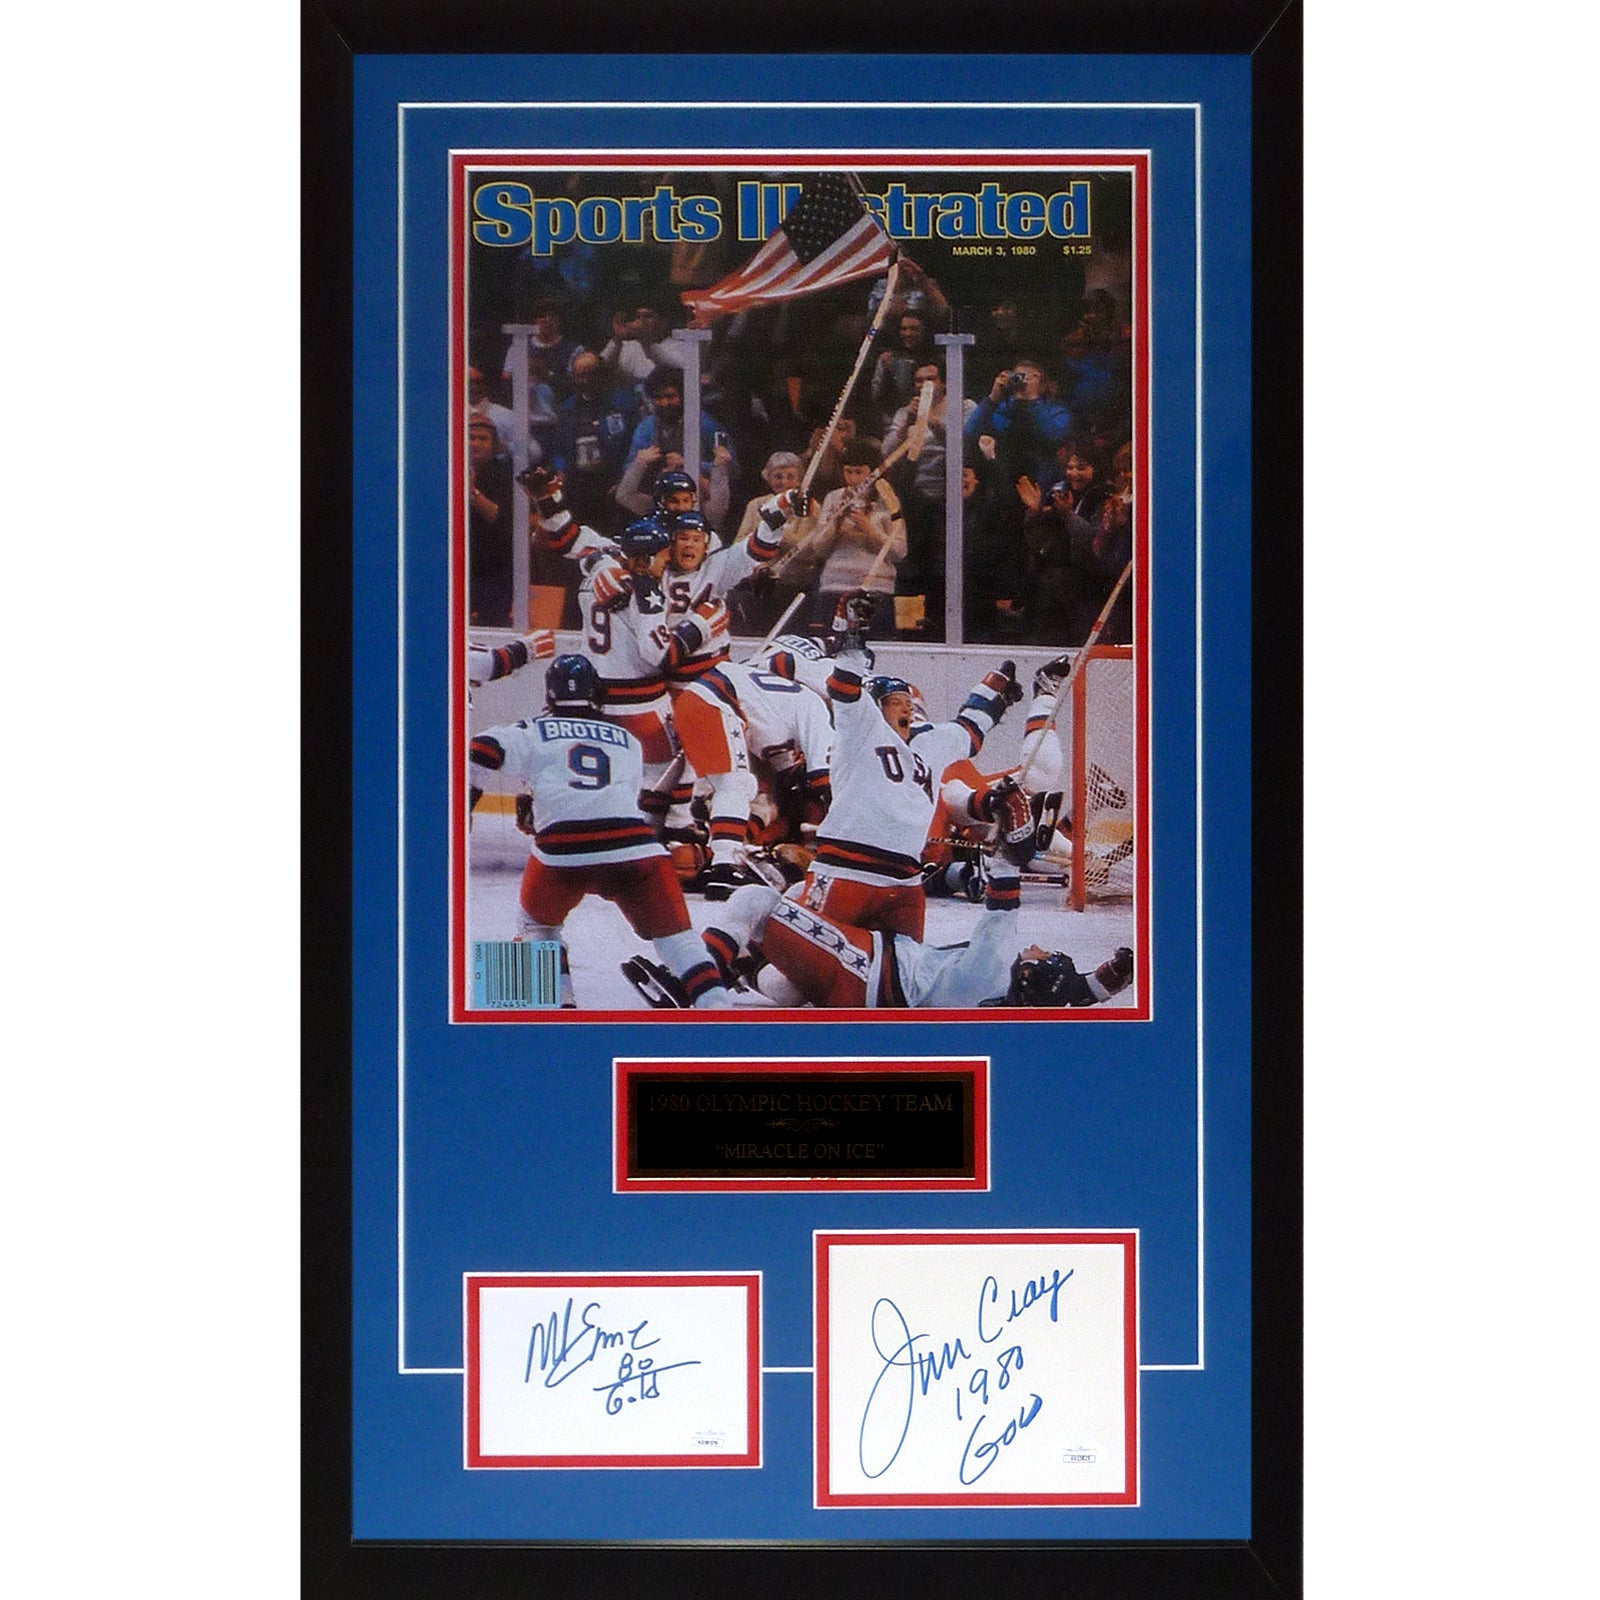 1980 USA Miracle on Ice Olympic Hockey Framed & Matted Photo